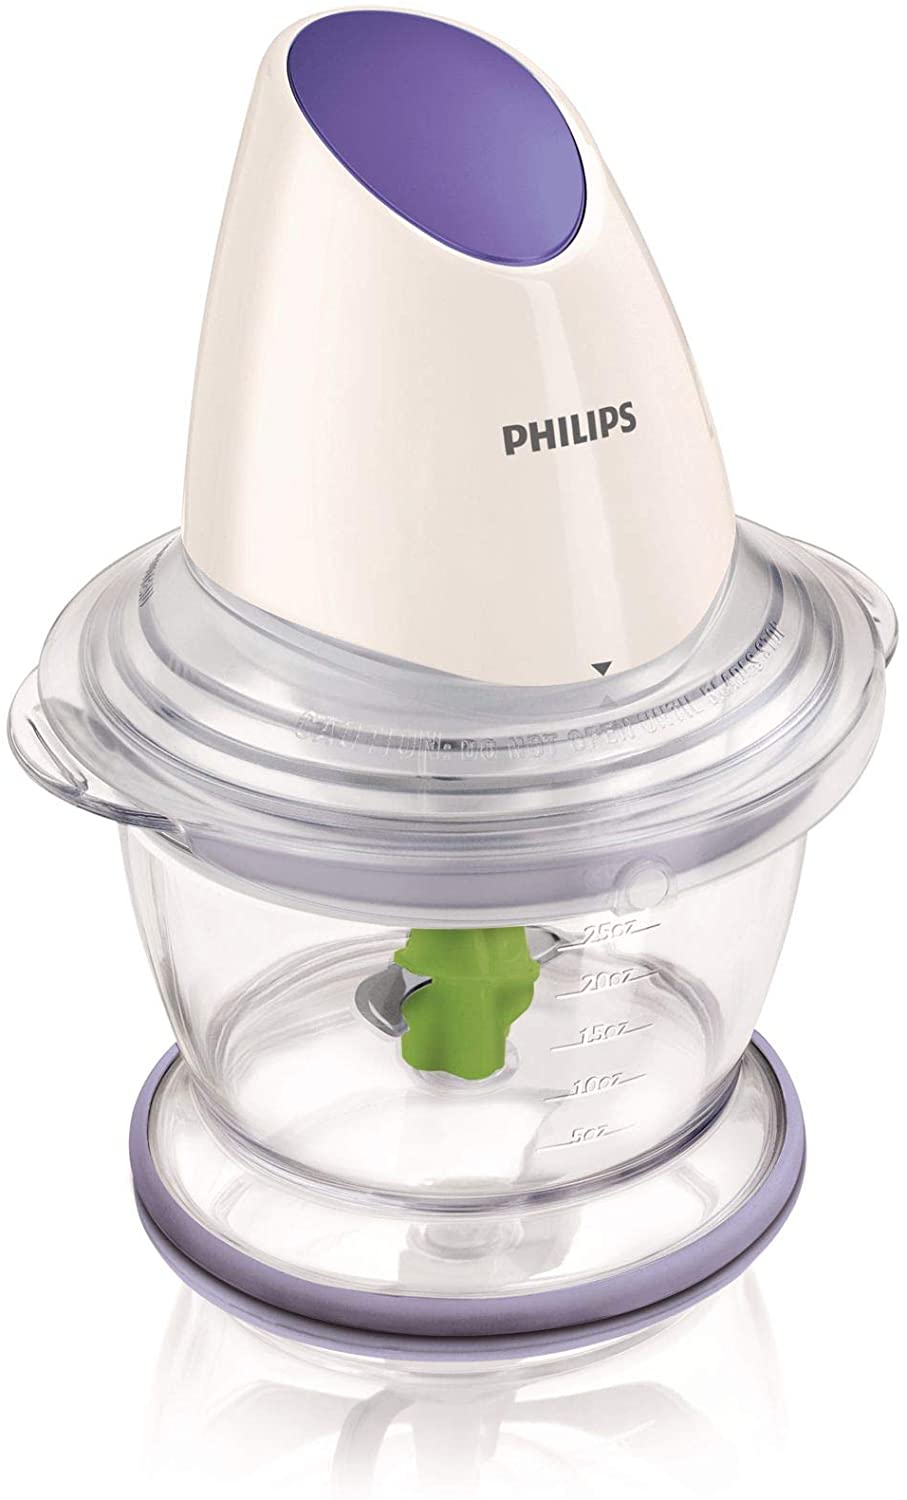 Philips Multichopper Review and Demo 